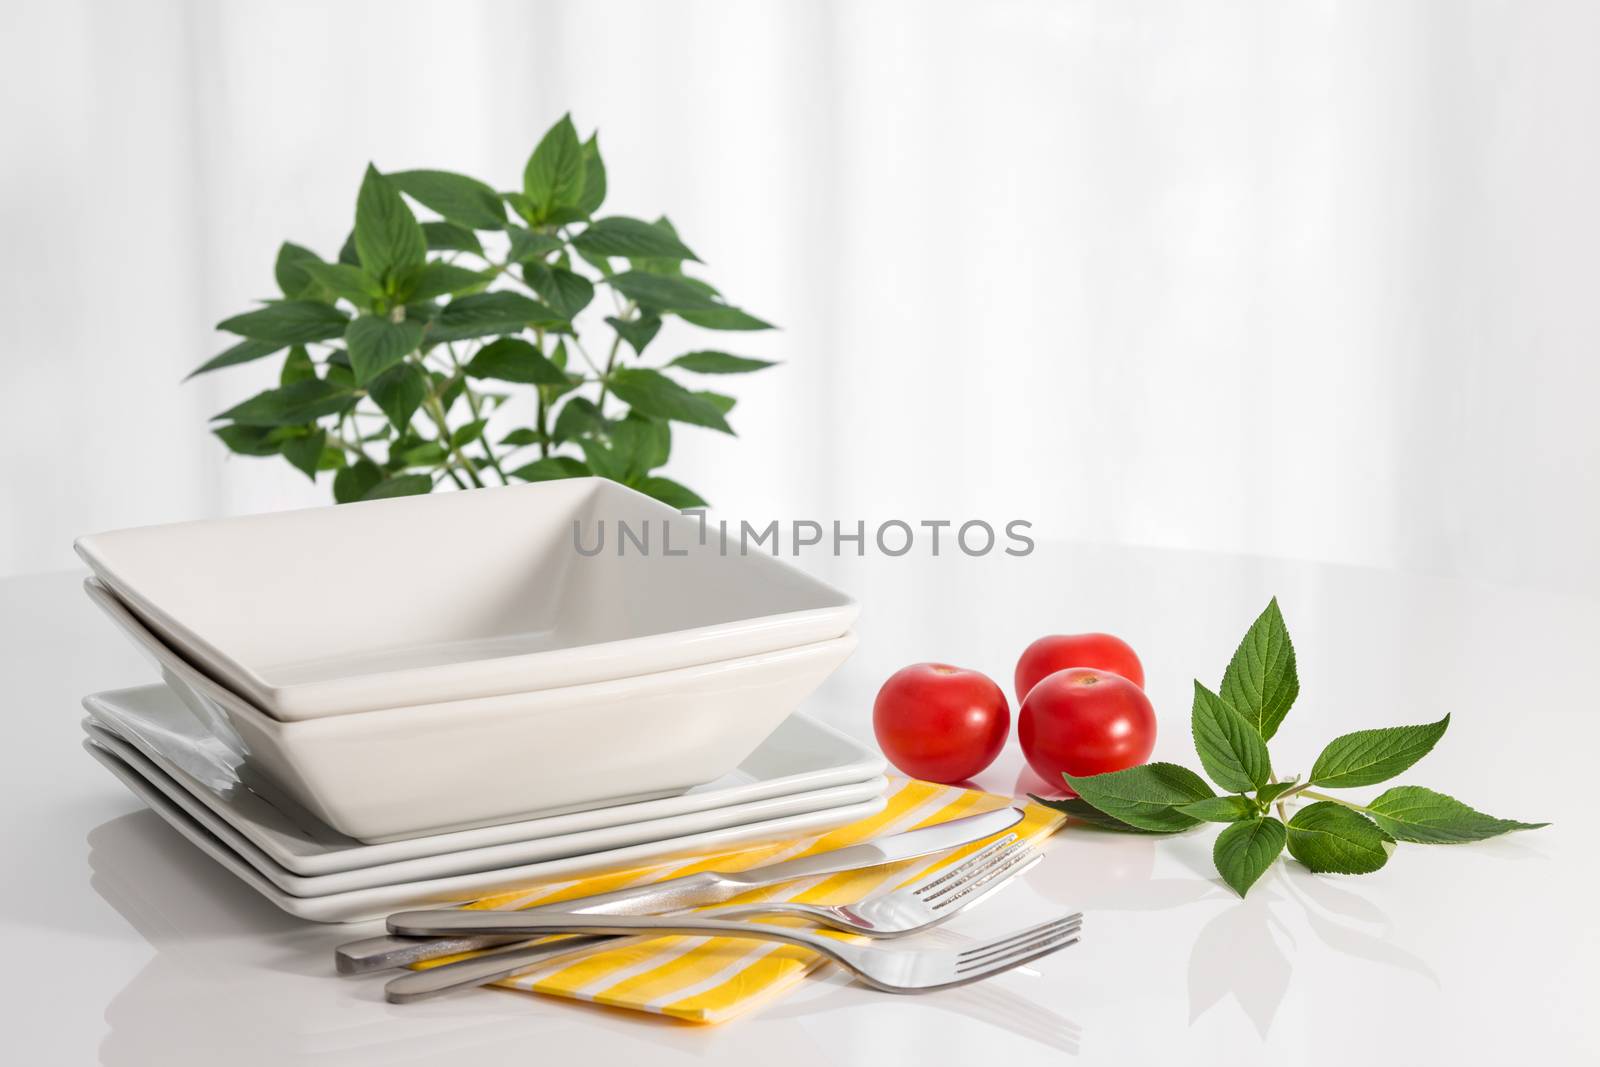 Plates and kitchen utensils on a white table by anikasalsera